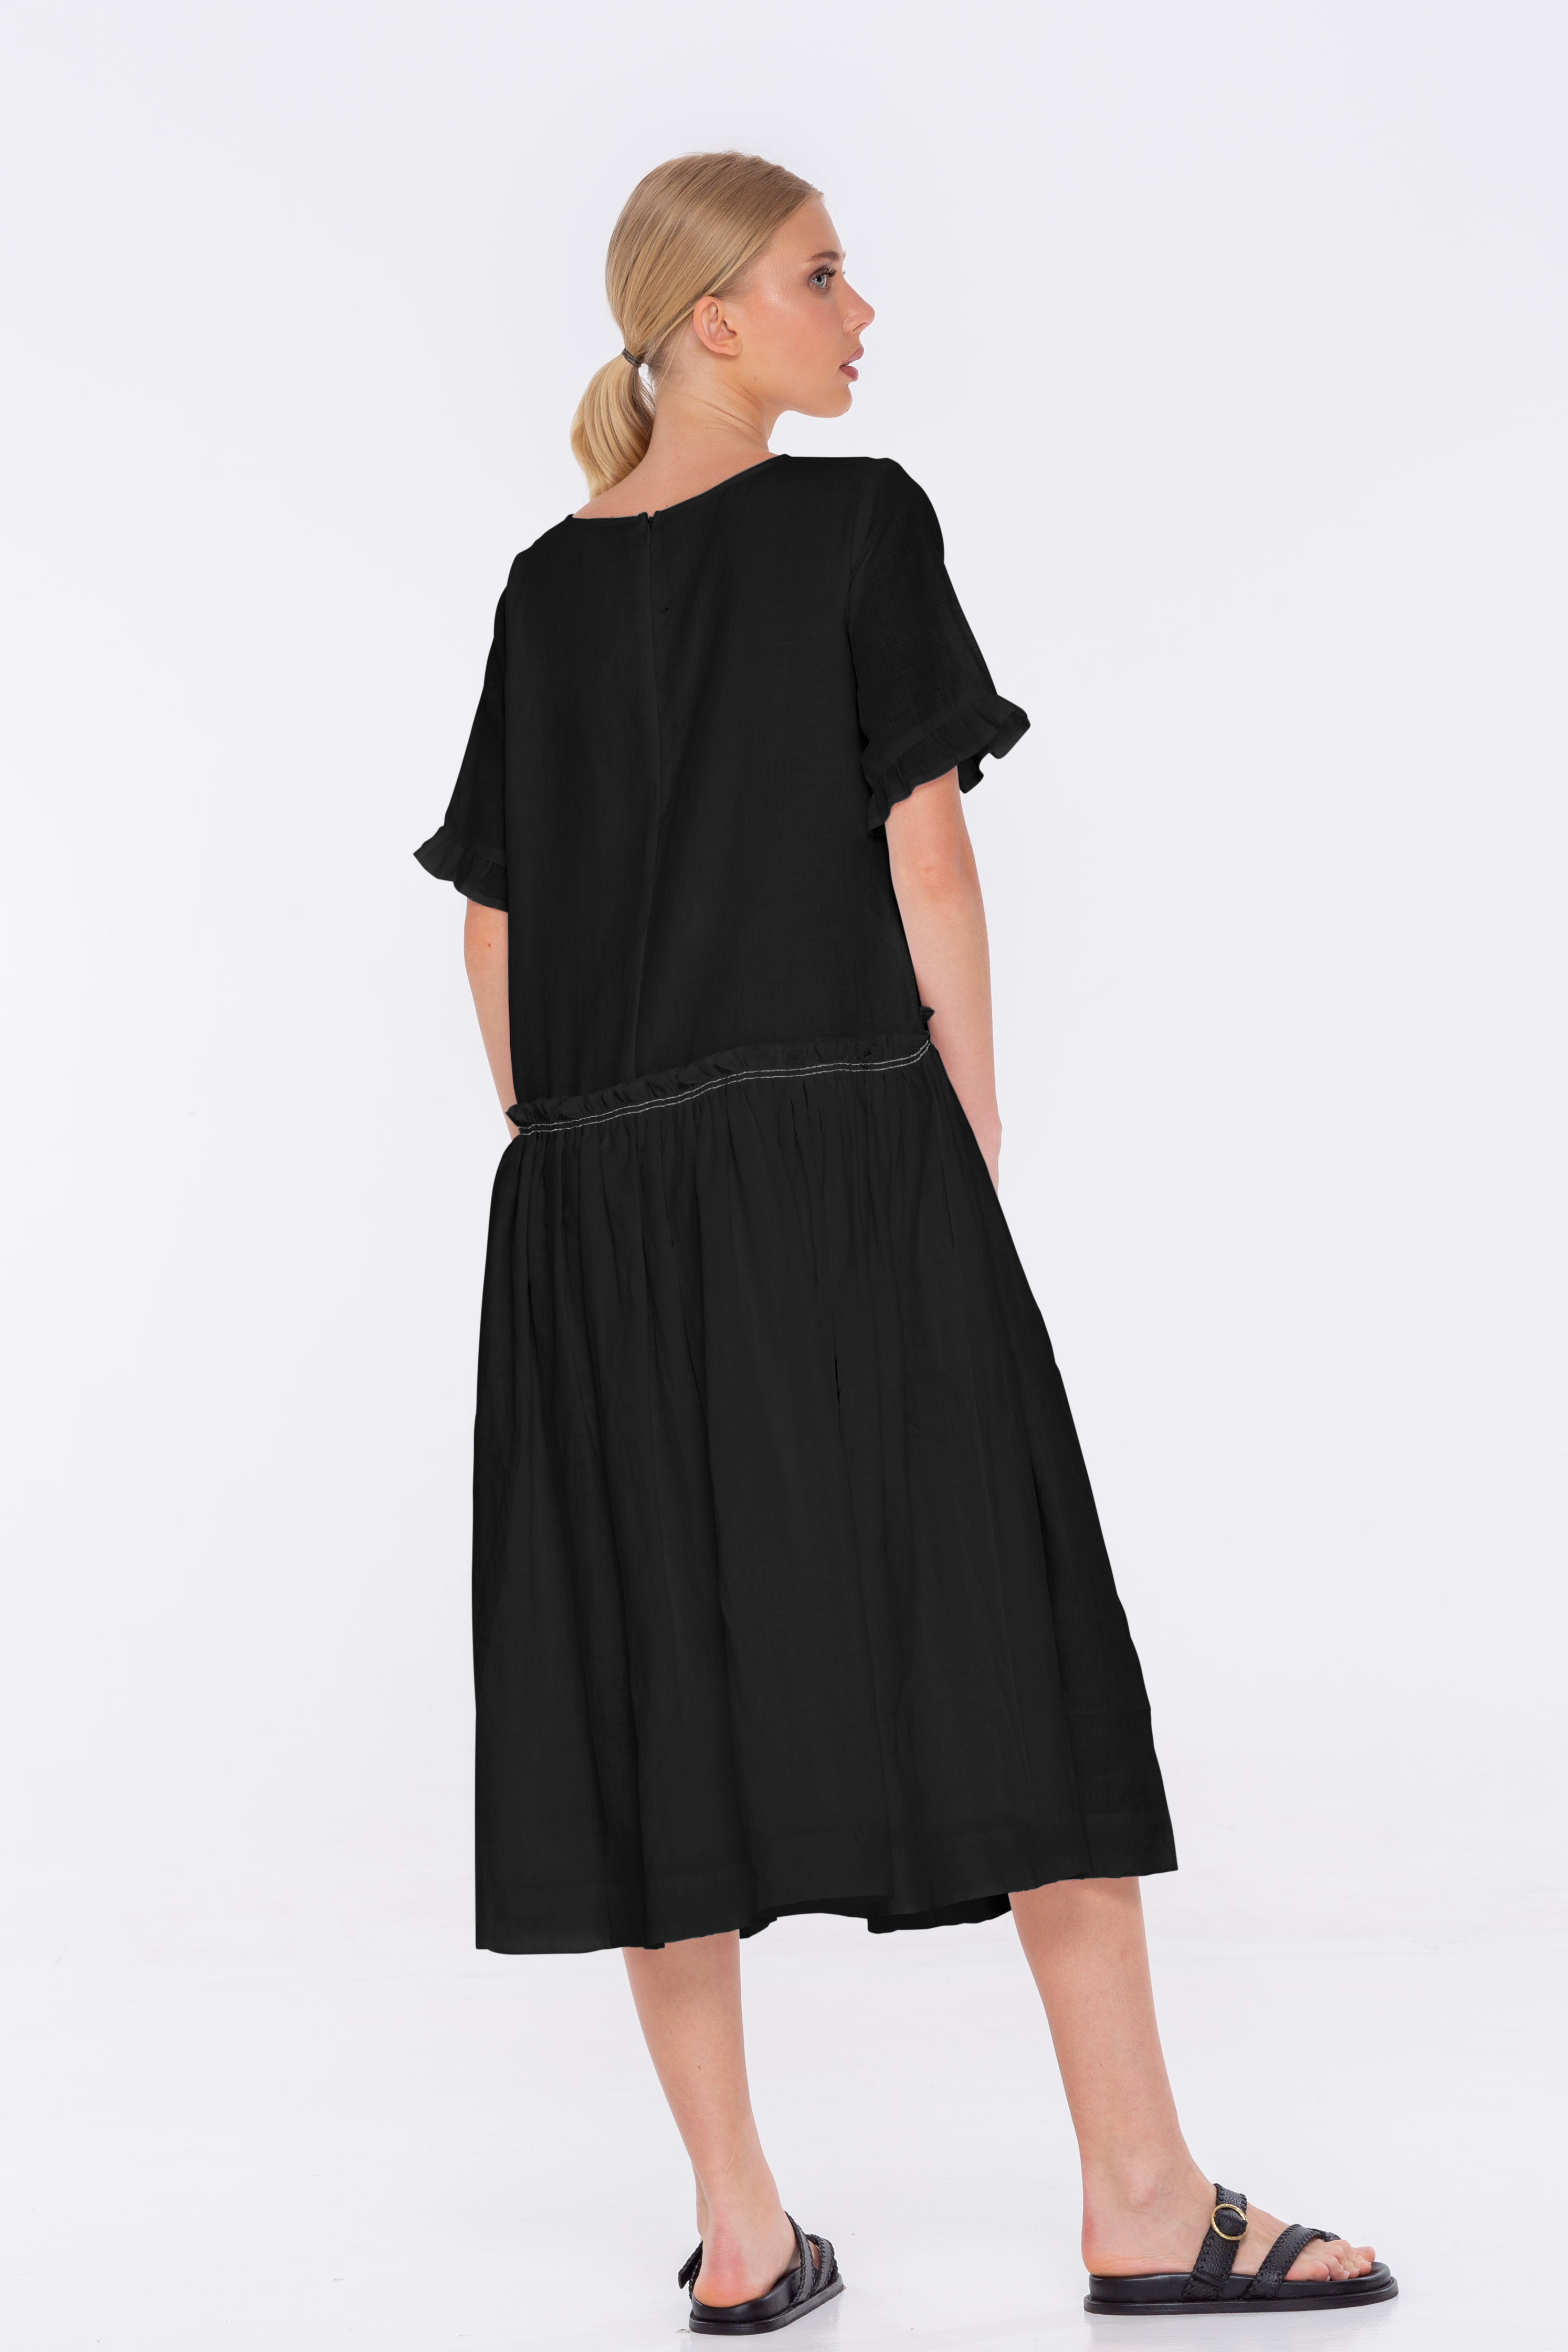 Only You Dress - Black with White Waist Stitching